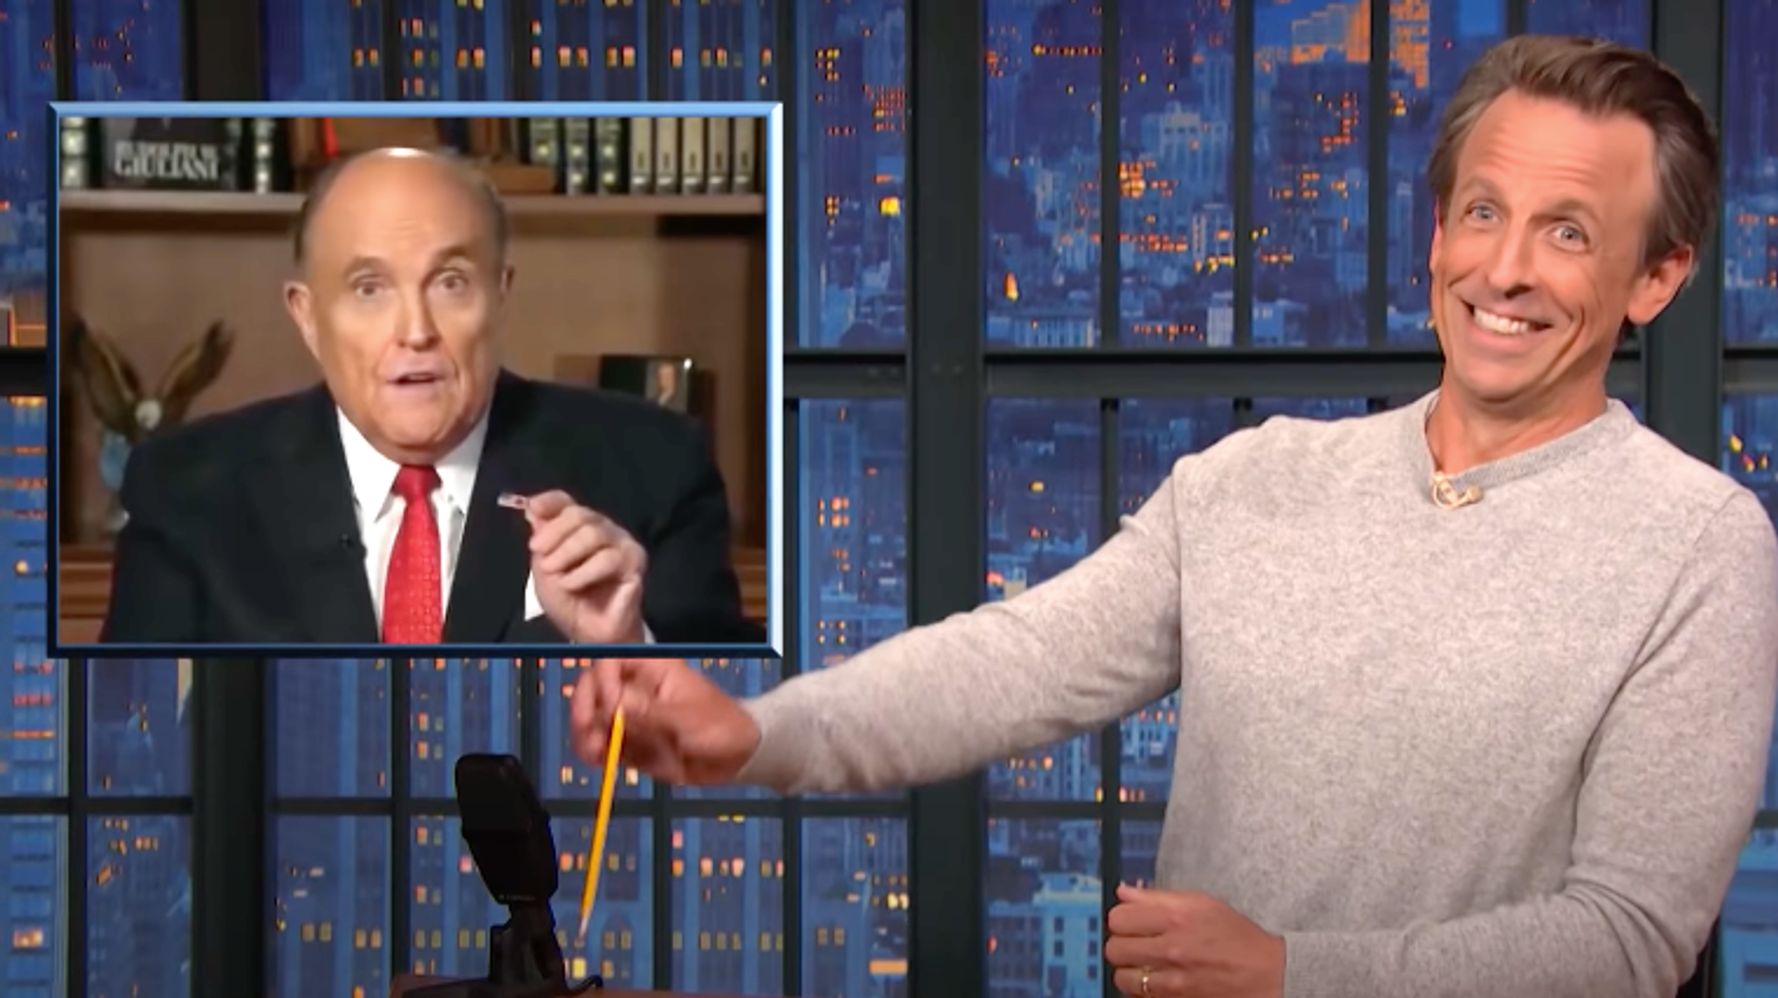 Seth Meyers Goes All In With Savage 10-Minute Roast Of Rudy Giuliani